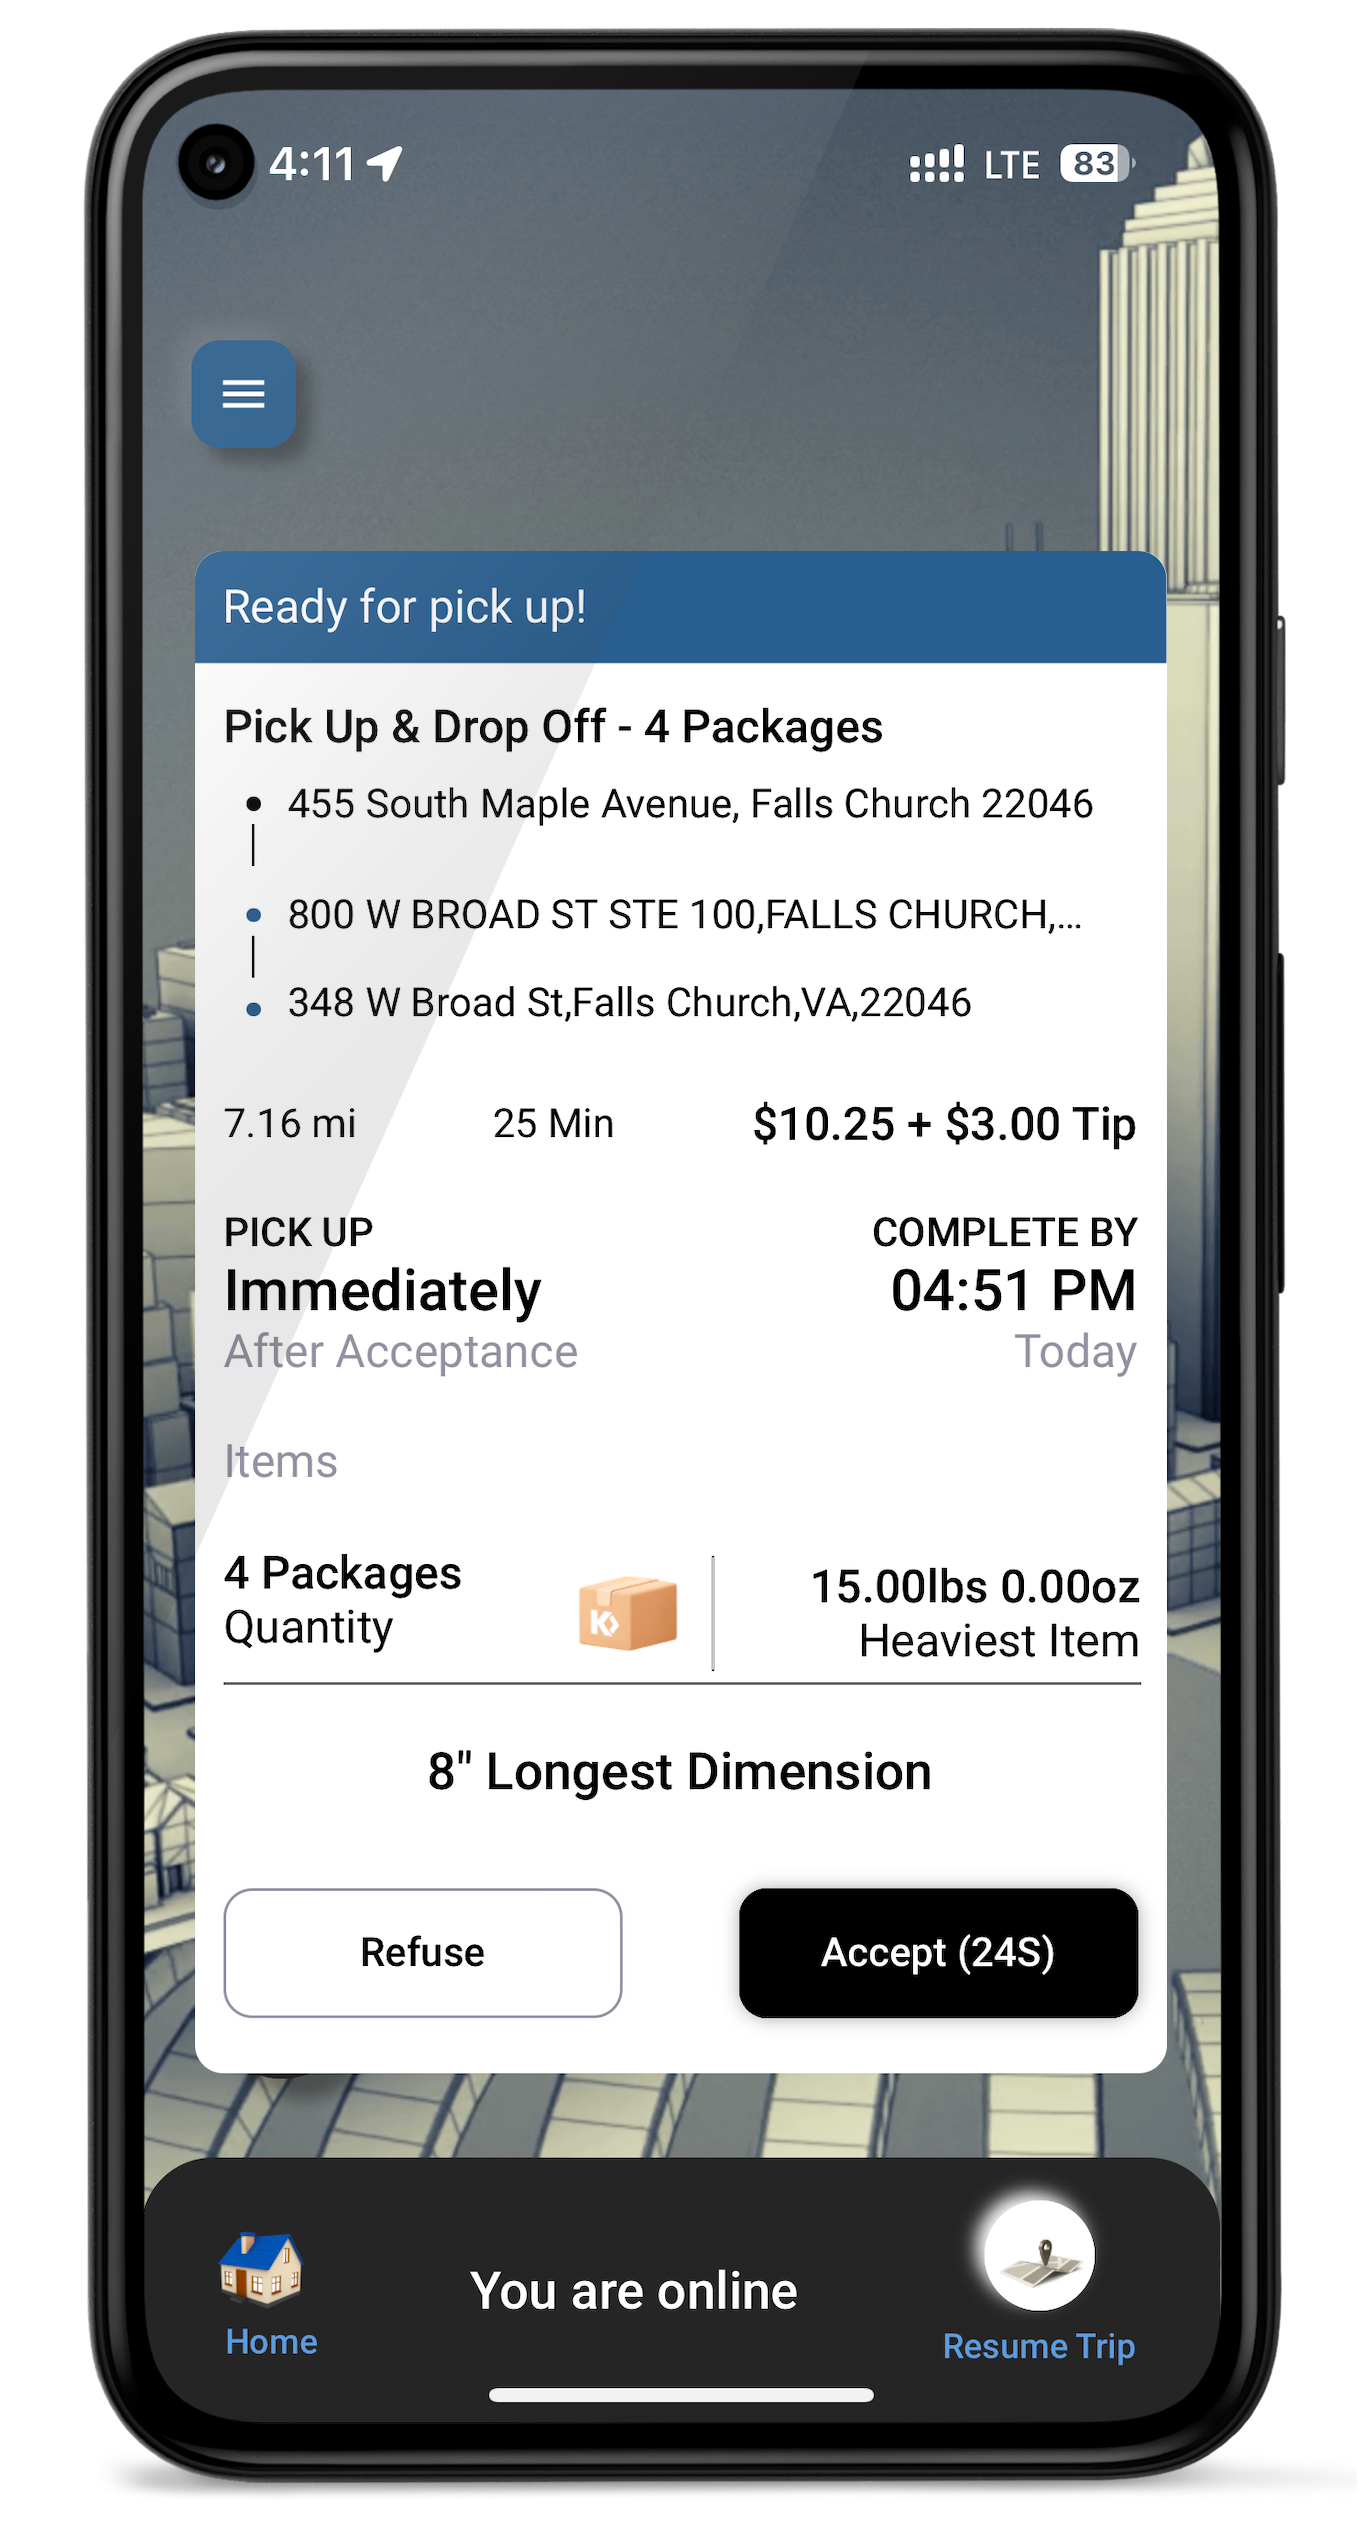 Drivers can view assignments with package size, type, and dimension